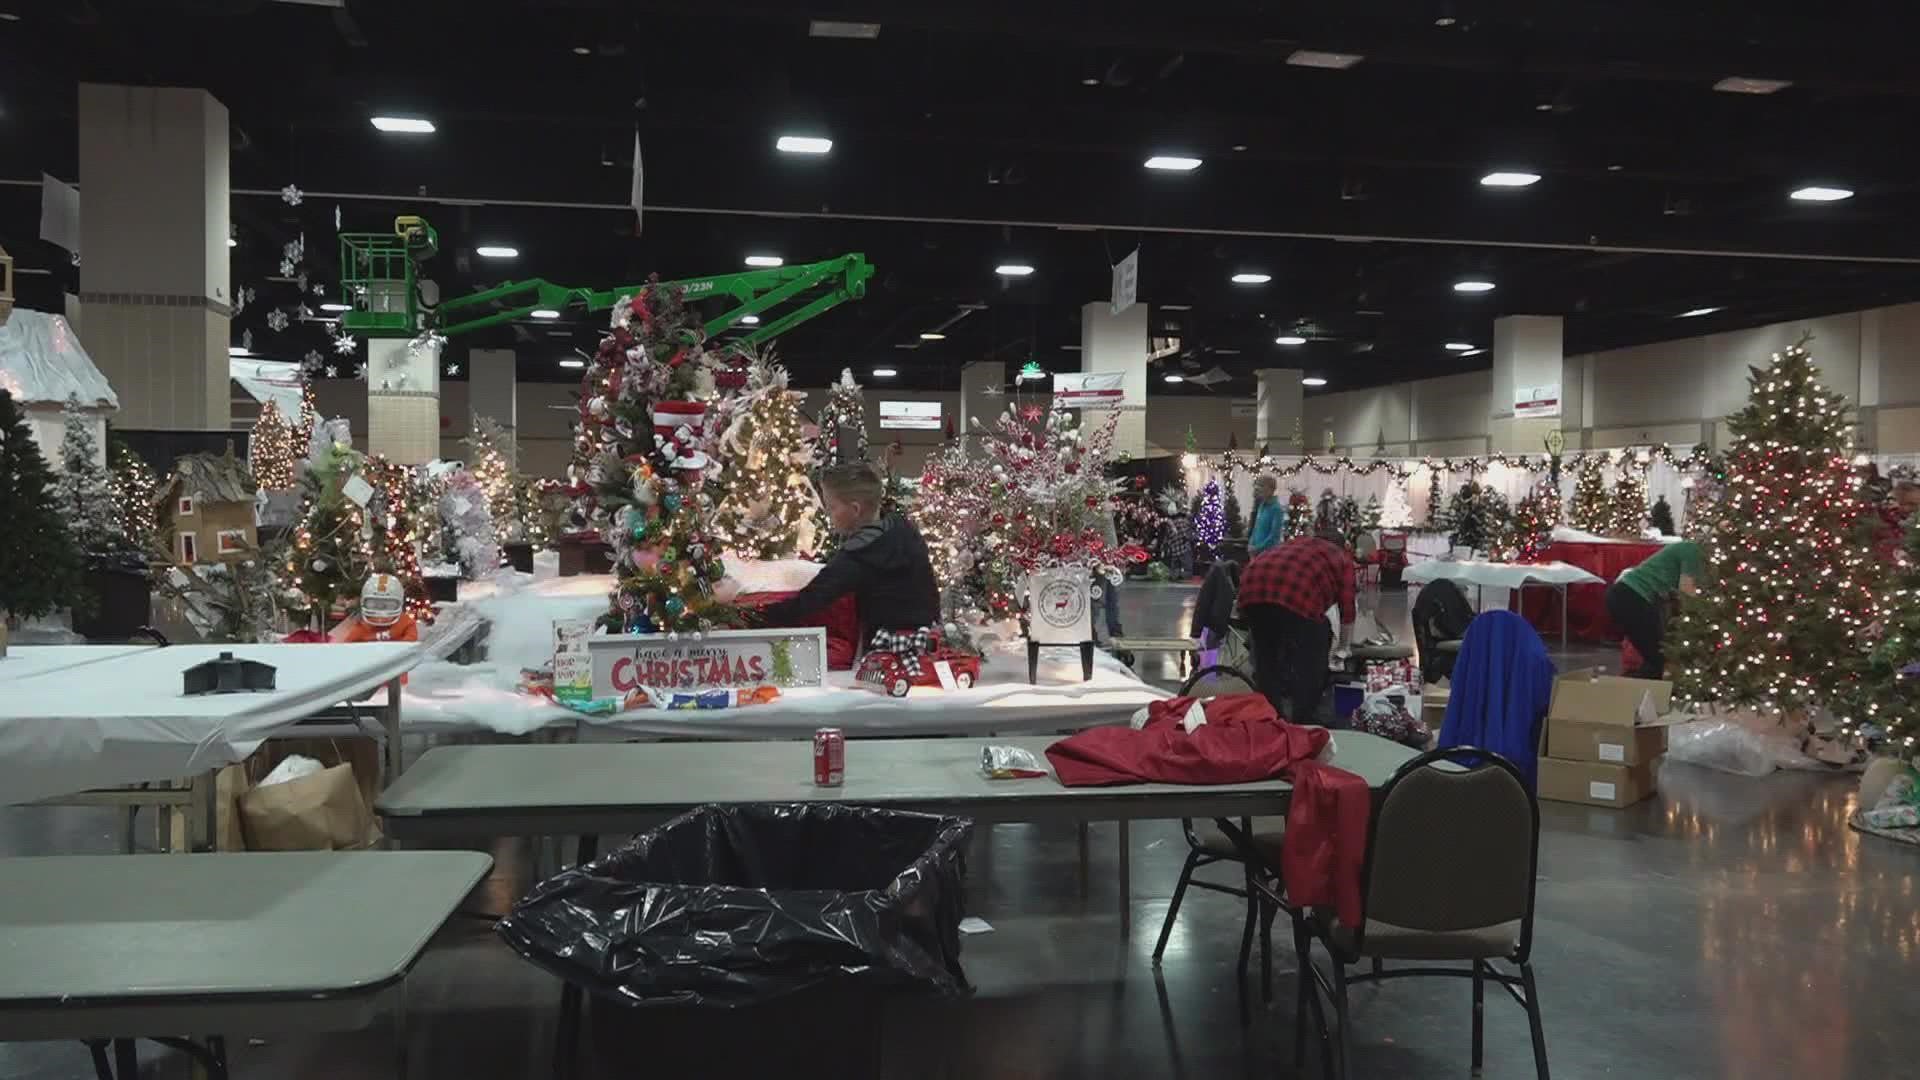 If you're looking to keep that holiday spirit going this weekend, Fantasy of Trees continues at the Knoxville Convention Center.